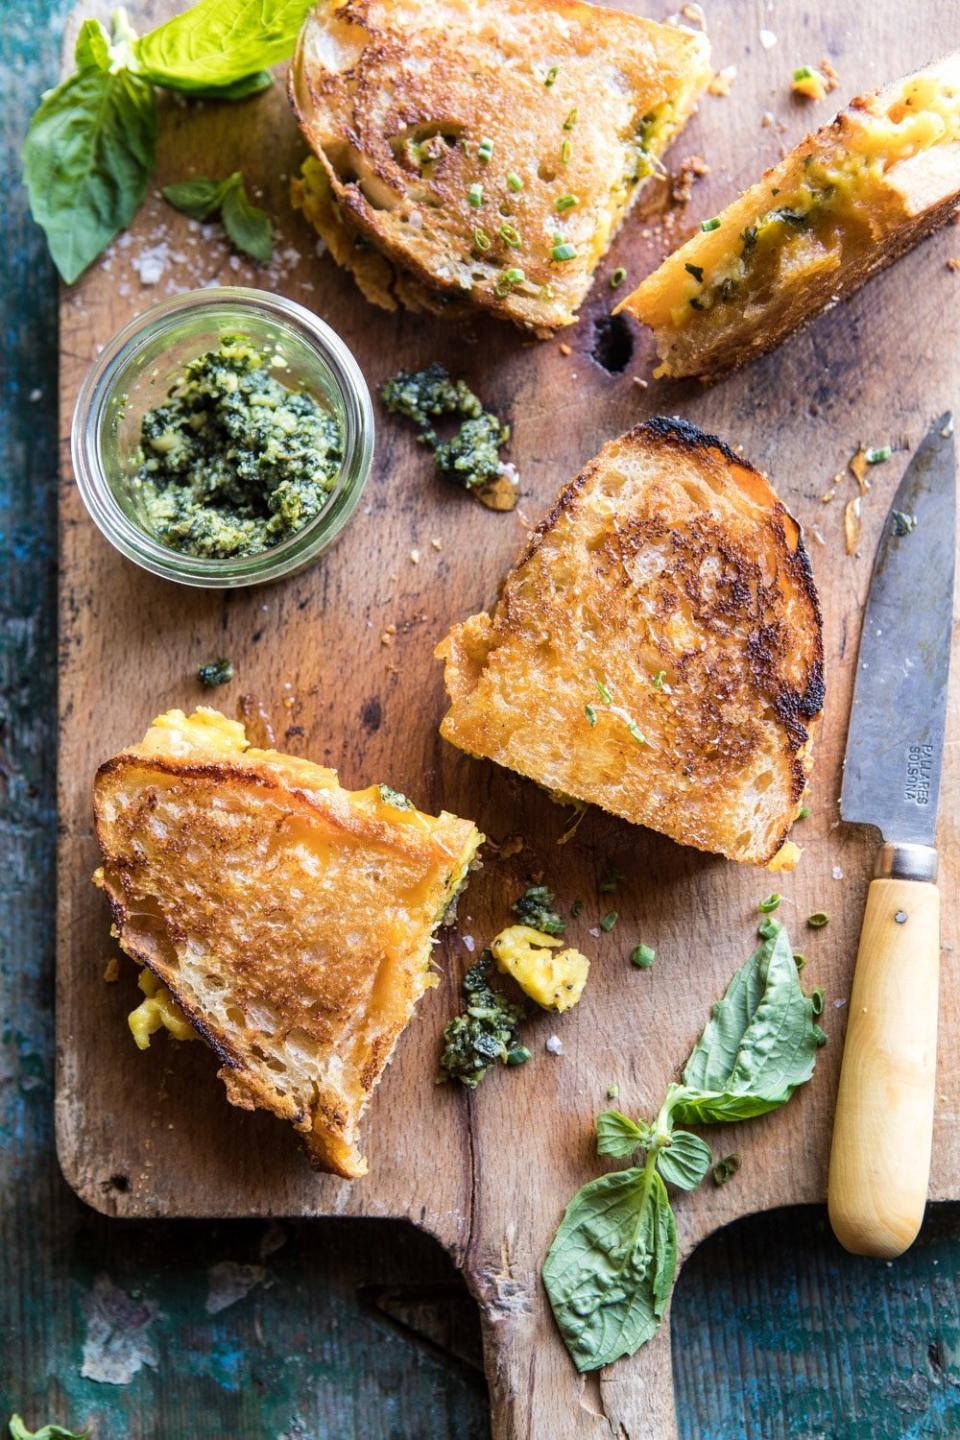 <strong>Get the&nbsp;<a href="https://www.halfbakedharvest.com/breakfast-grilled-cheese/" target="_blank">Breakfast Grilled Cheese with Soft Scrambled Eggs and Pesto</a>&nbsp;recipe from Half Baked Harvest</strong>